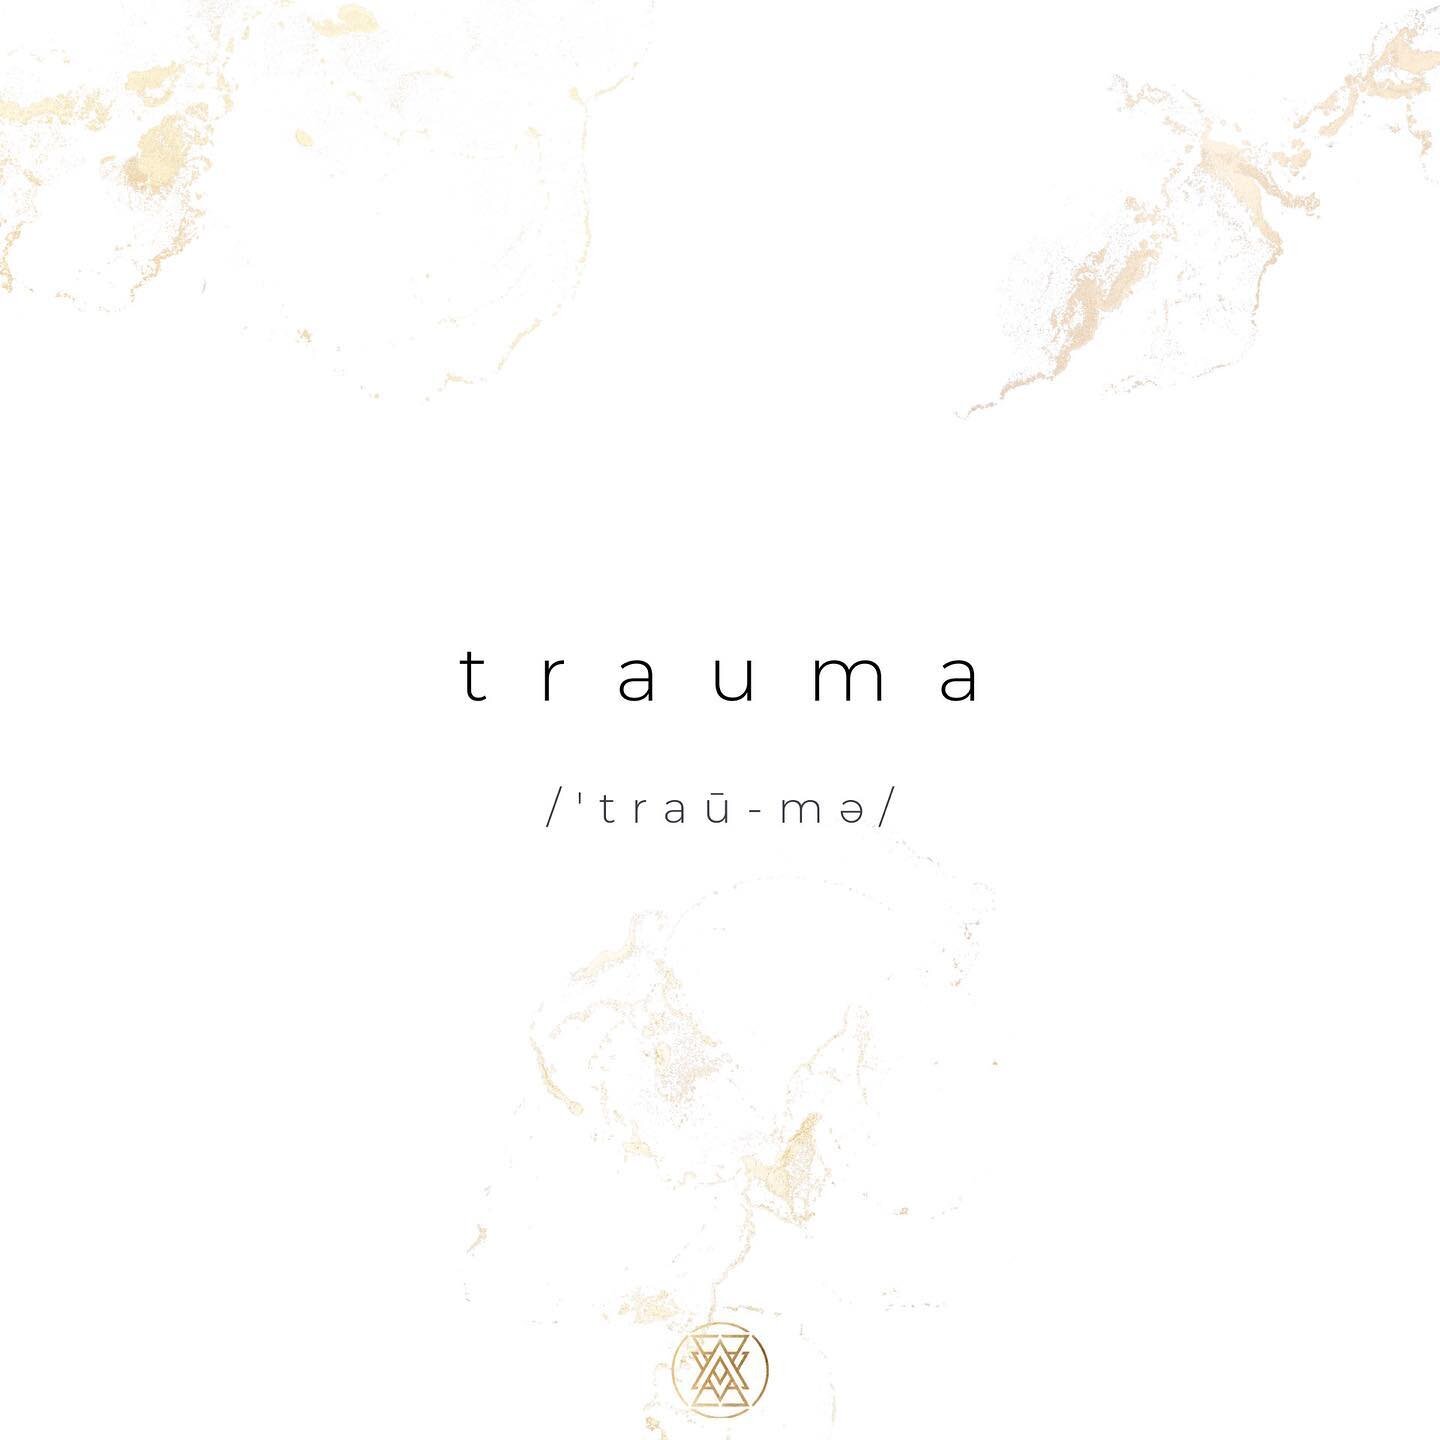 trauma literally means wound. ⁣
⁣
it&rsquo;s a term that refers to any disturbing life experience that threatens your sense of safety + can wound.⁣
⁣
trauma can include: natural disasters, accidents, war (soldier or civilian in a country of war), IPV